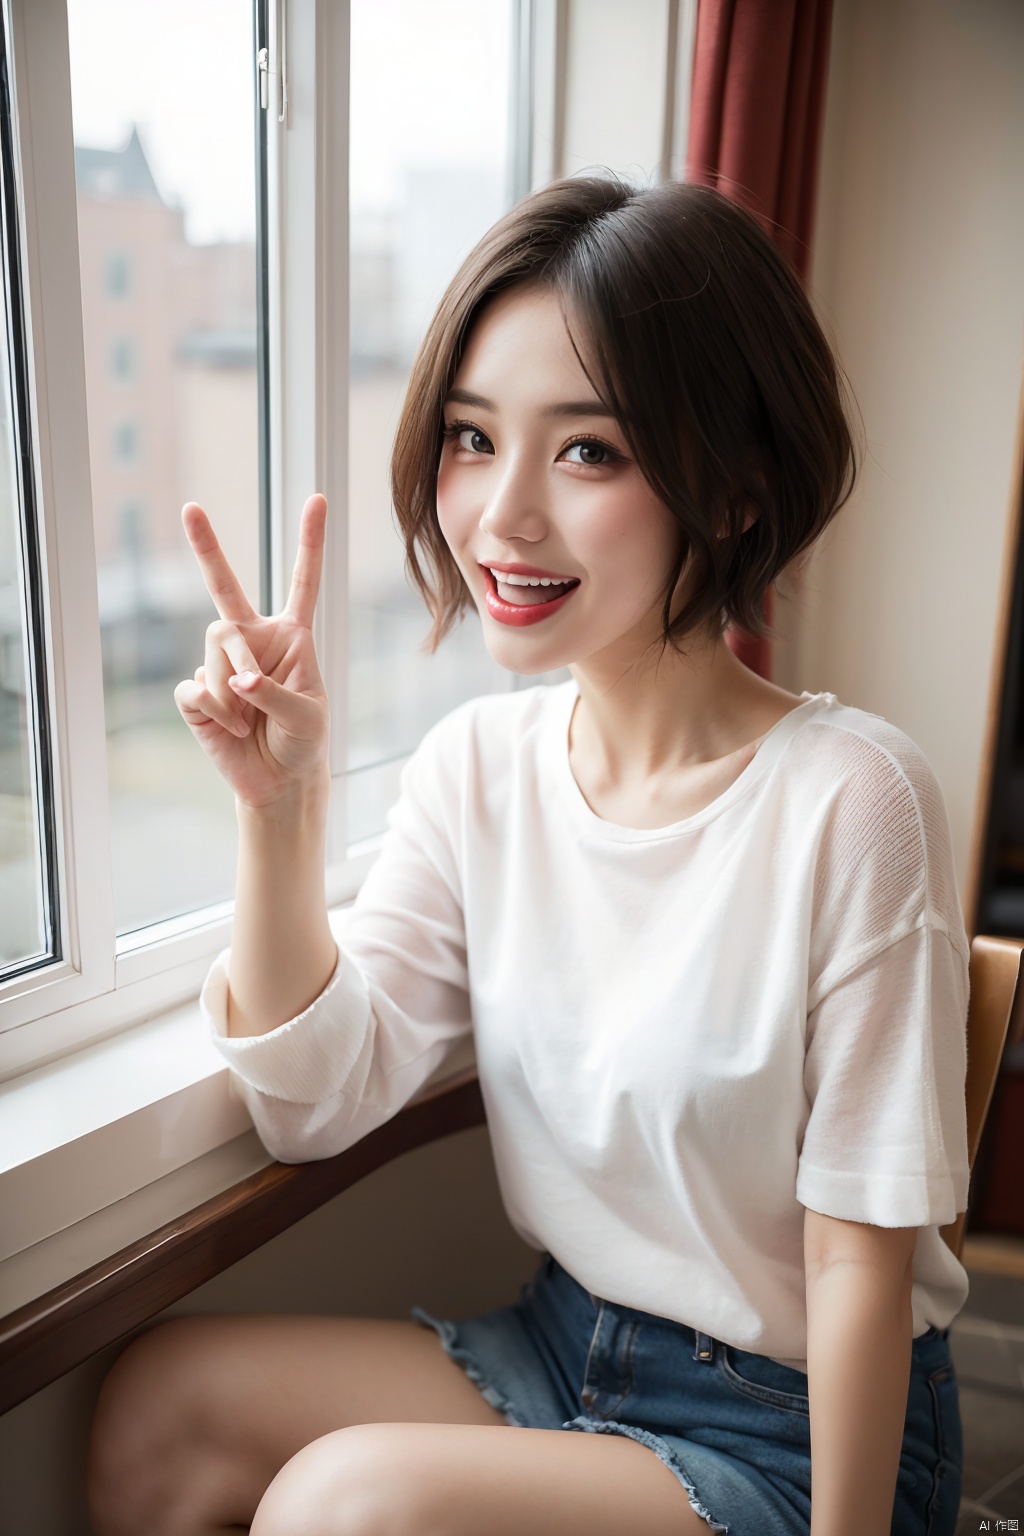 A cute girl with short hair, making a funny tongue sticking expression and making a victory gesture with one hand, sitting by the window